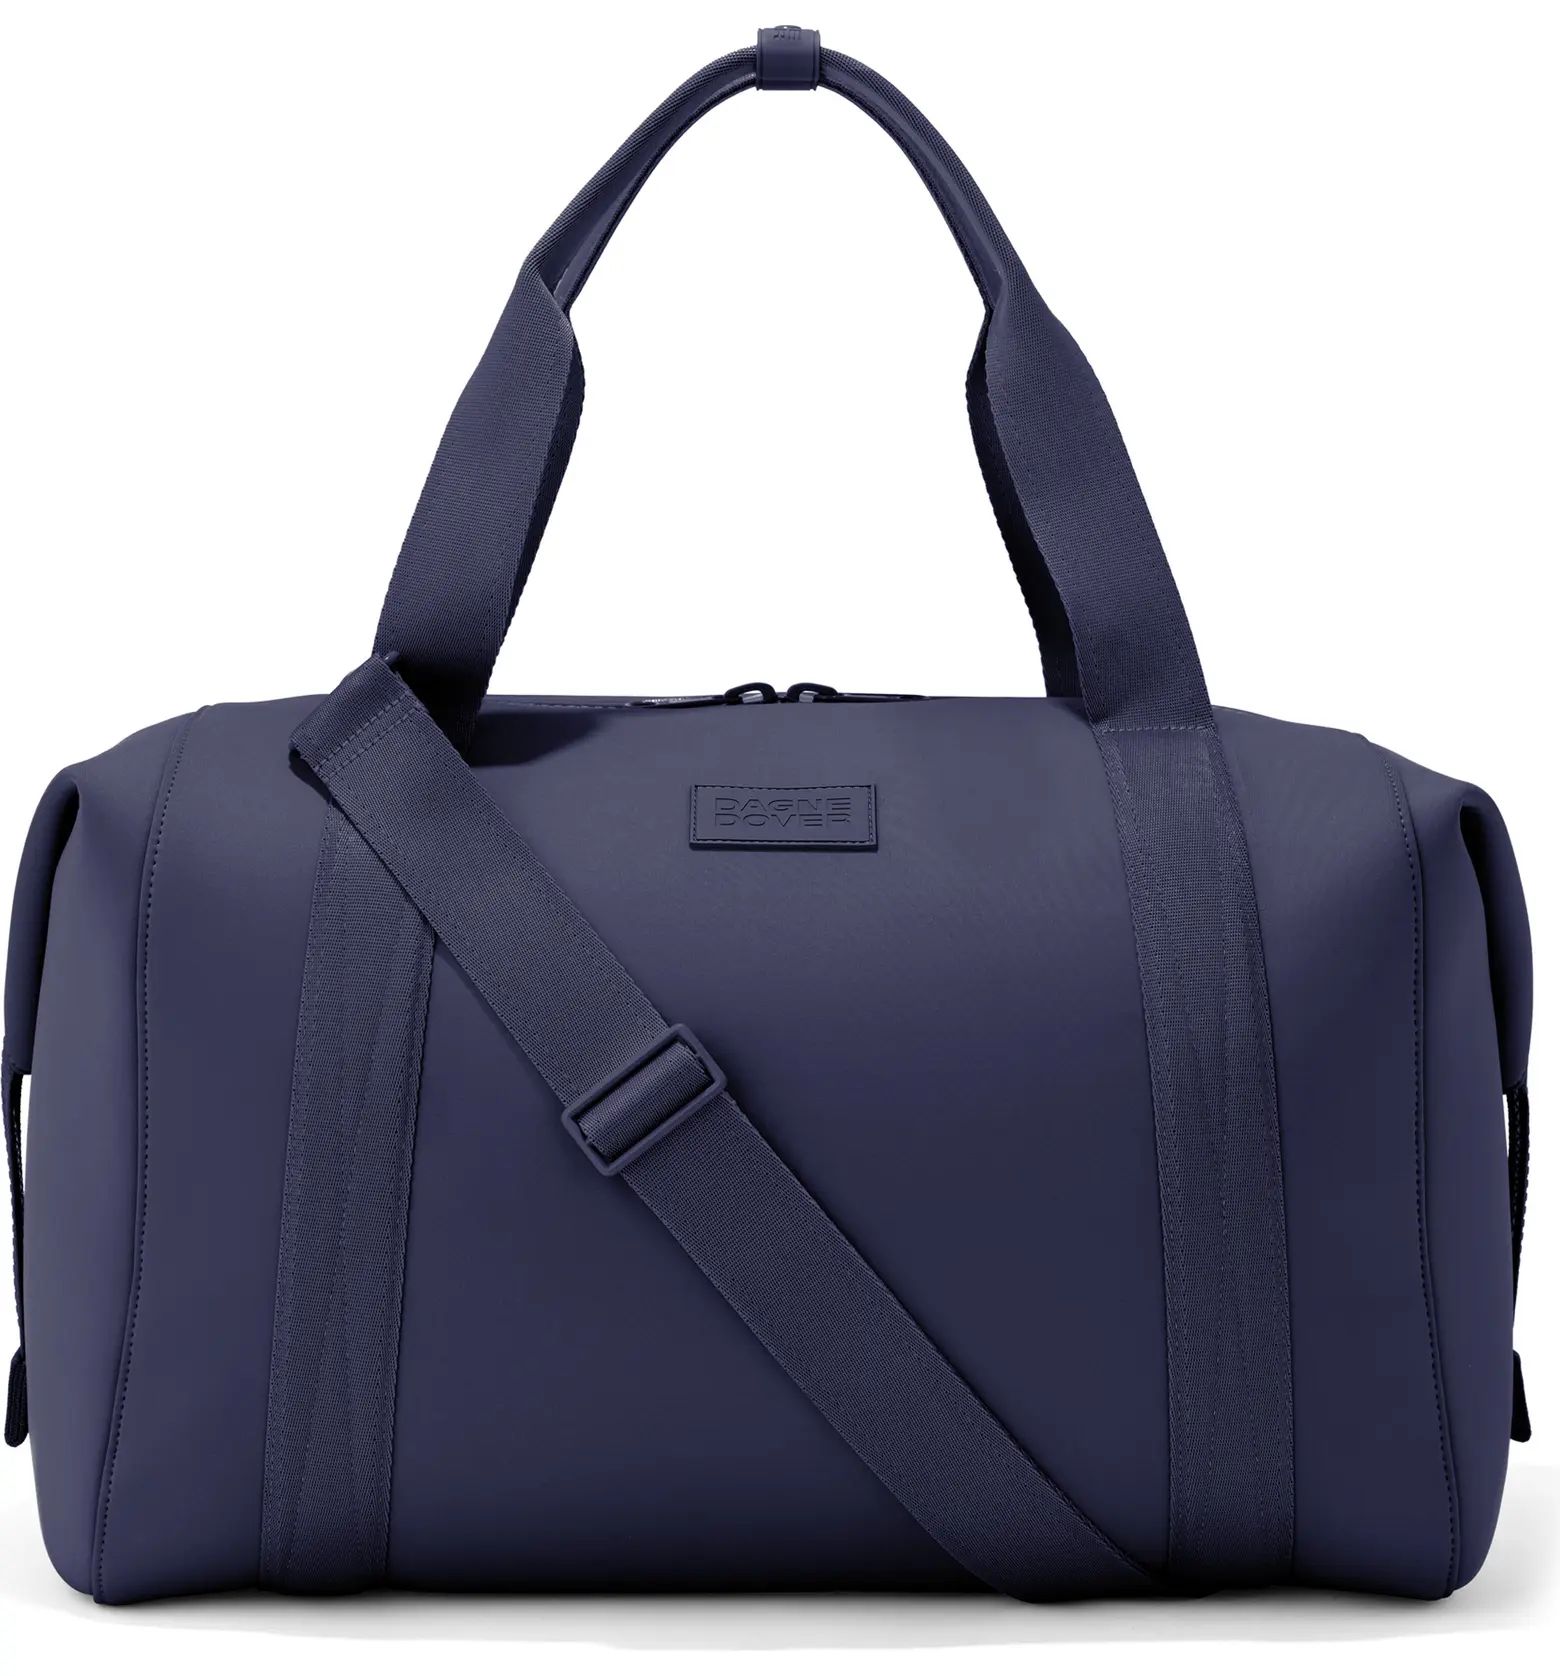 Landon Recycled Polyester Carryall Duffle | Nordstrom